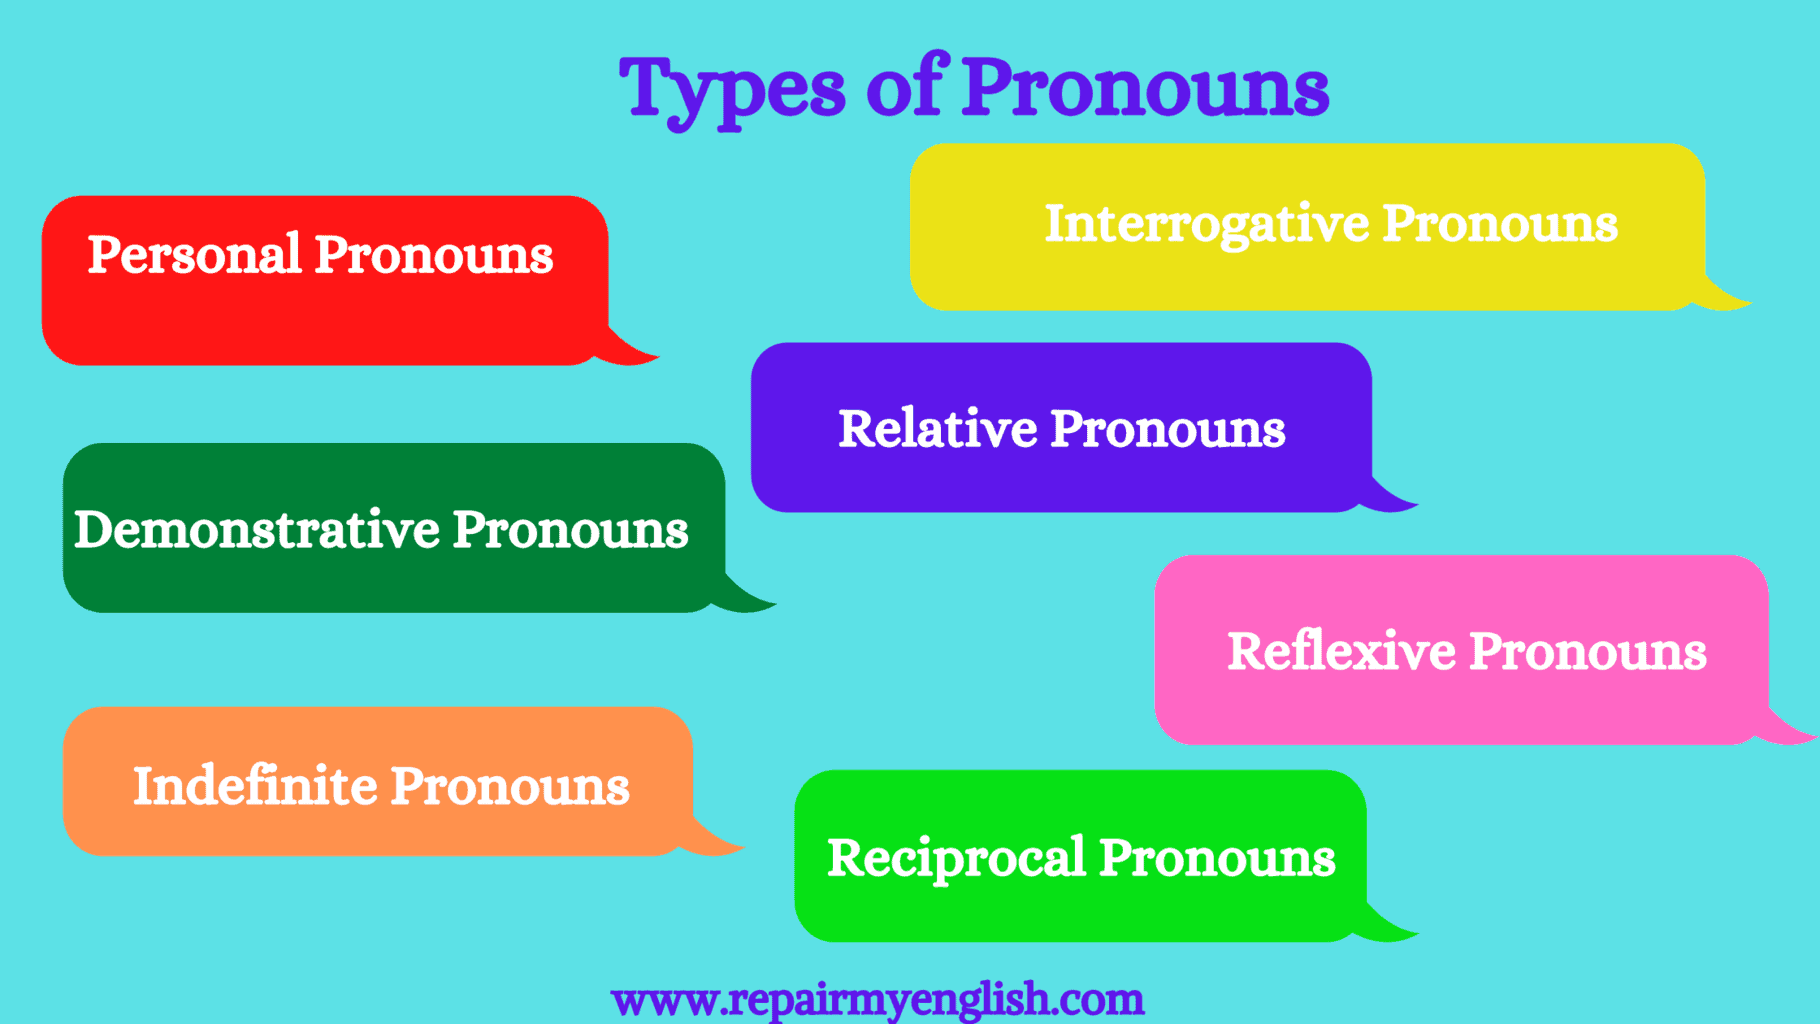 Definition and Types of Pronoun with examples | Repair My English